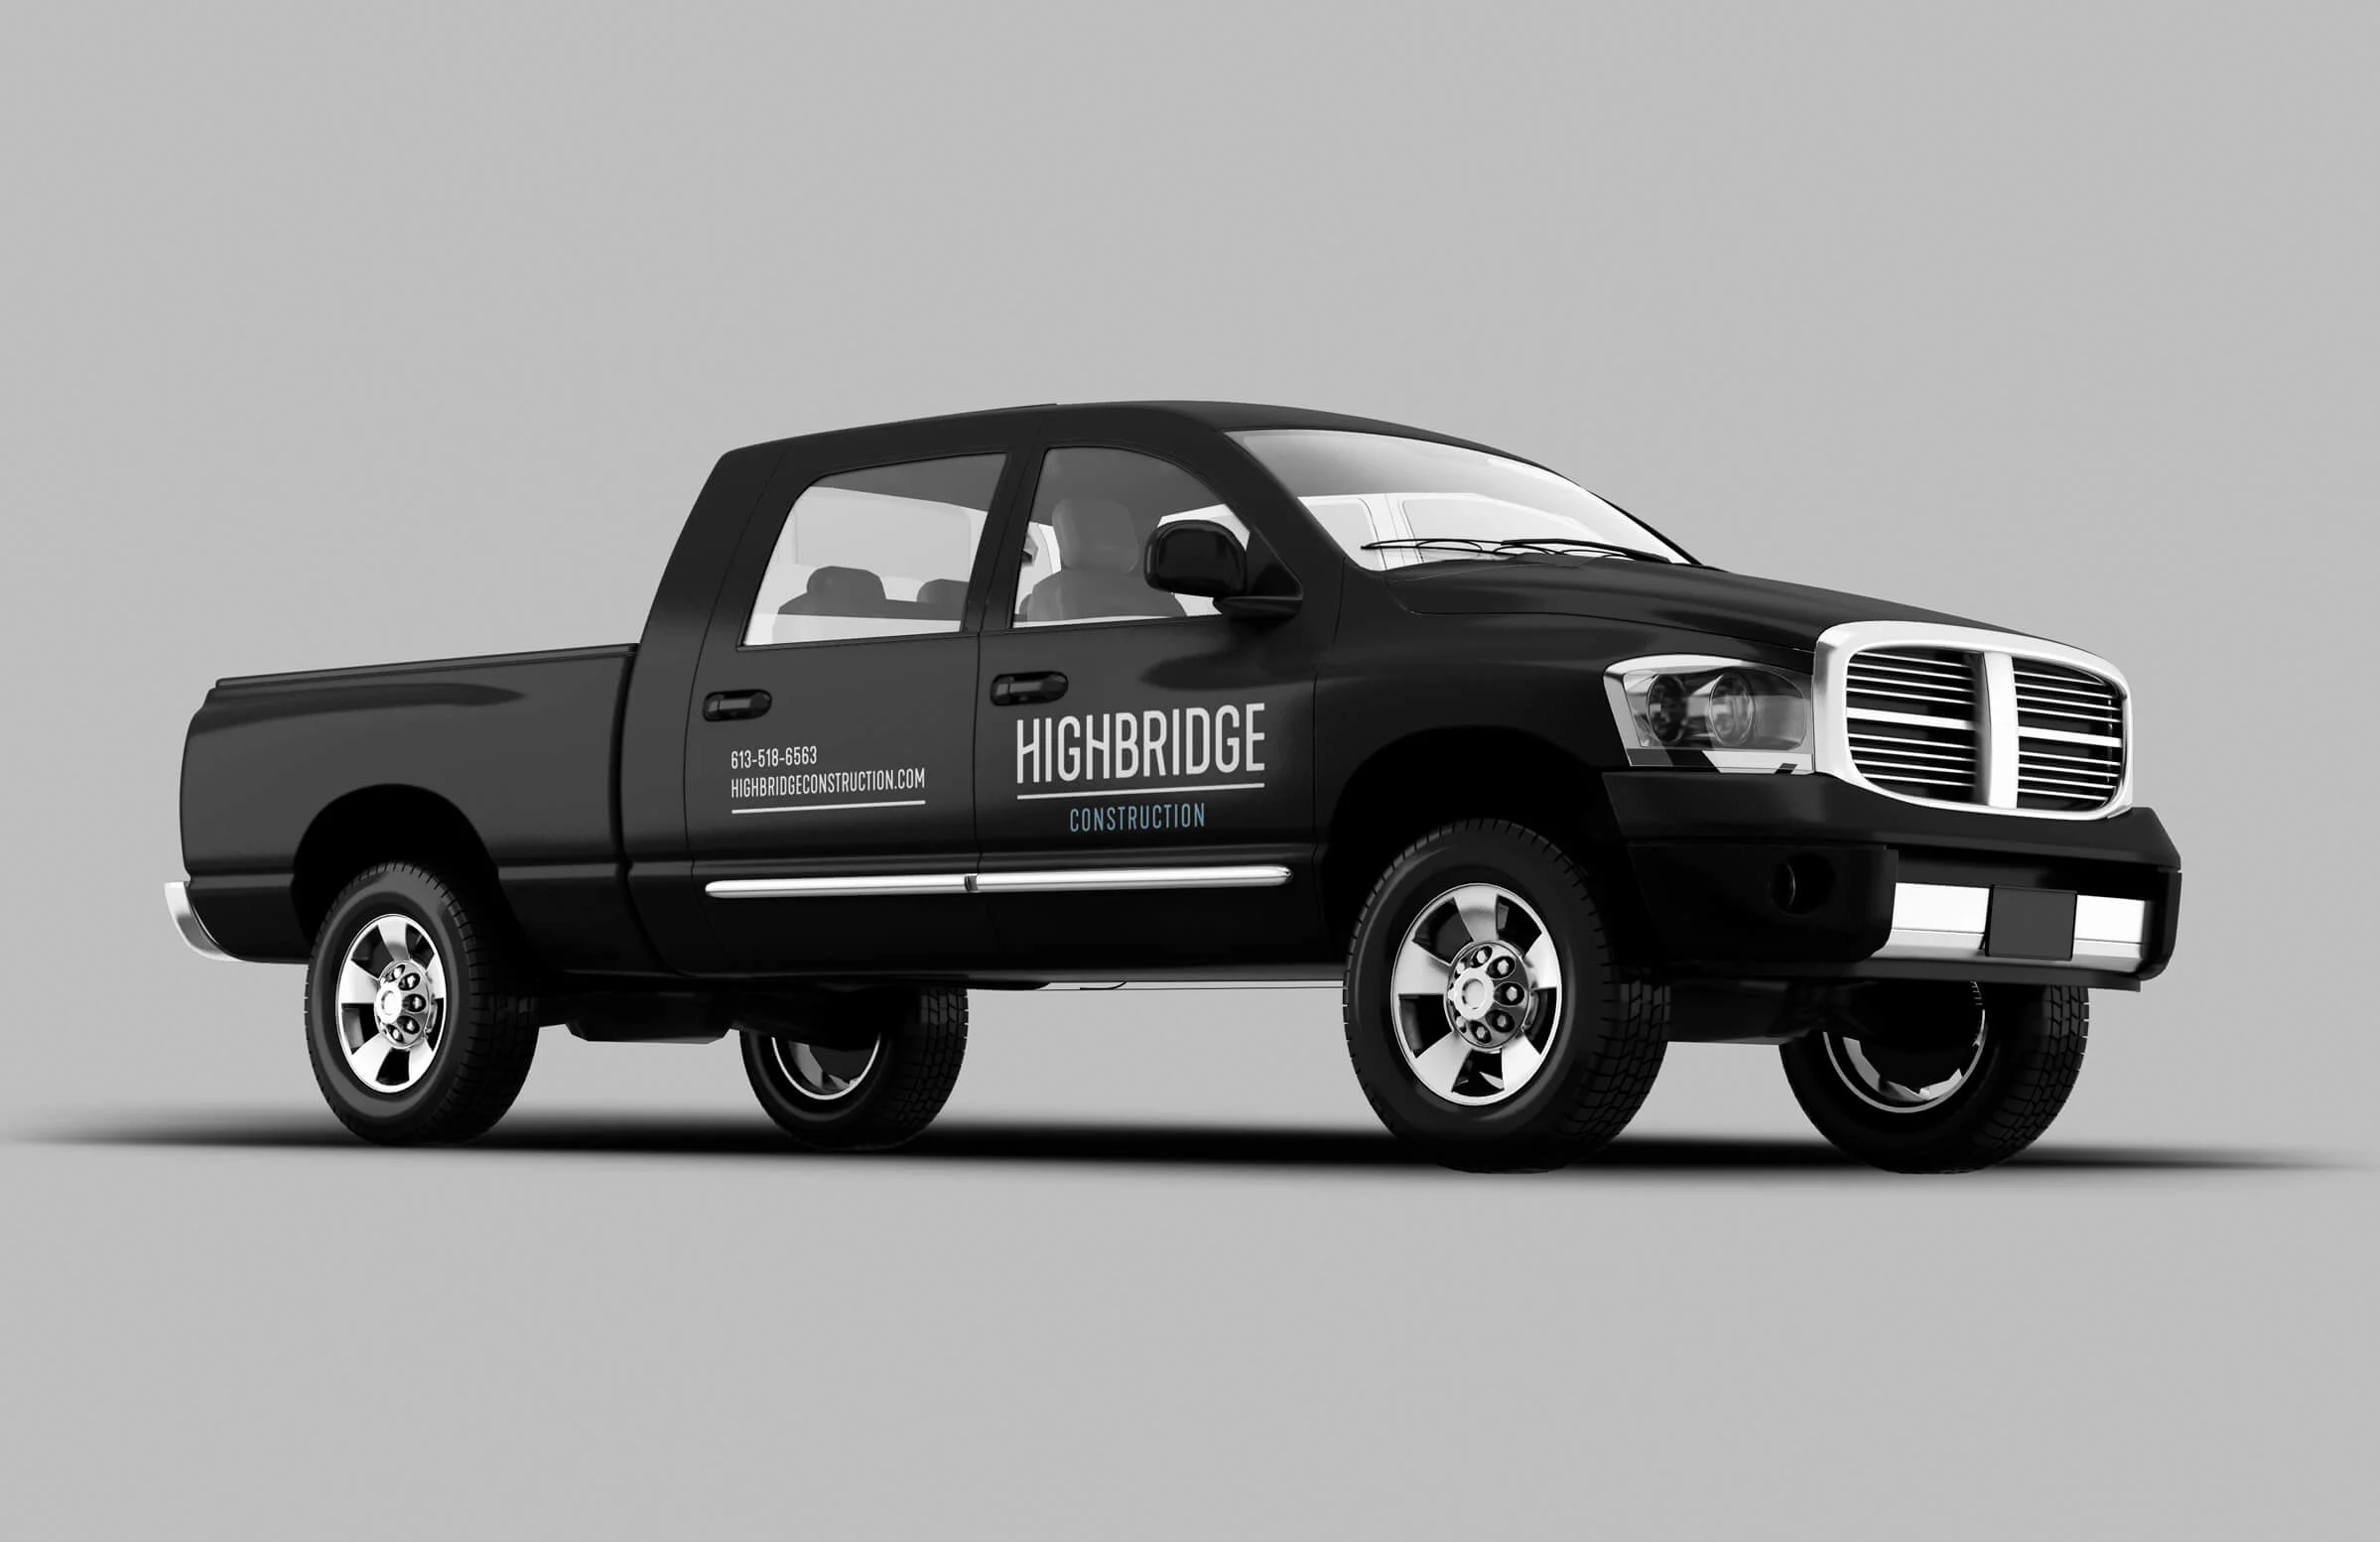 Highbridge Construction vehicle wrap for Ottawa-based general contractor by graphic designer idApostle